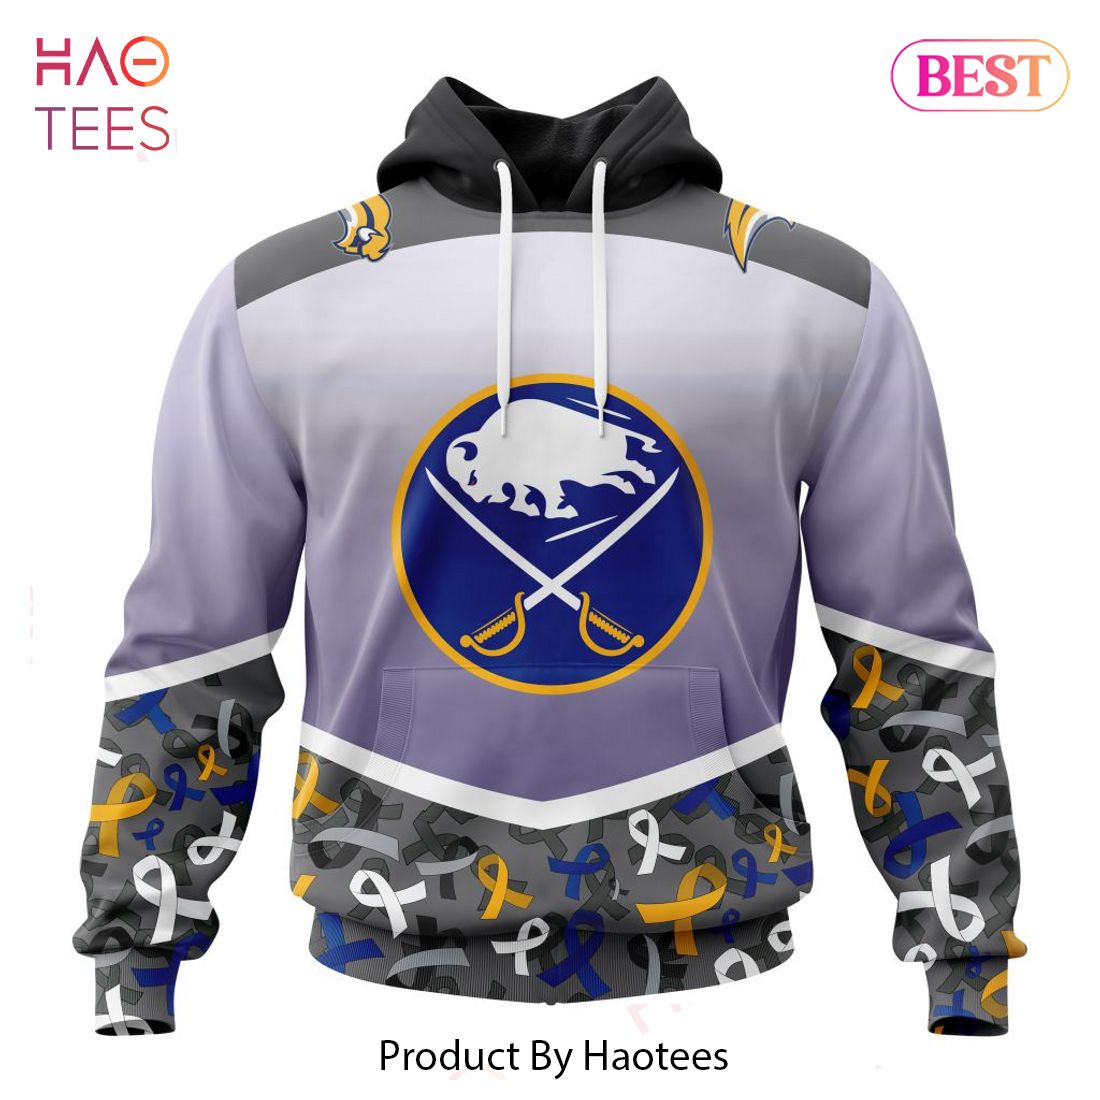 BEST NHL Buffalo Sabres Specialized Sport Fights Again All Cancer 3D Hoodie